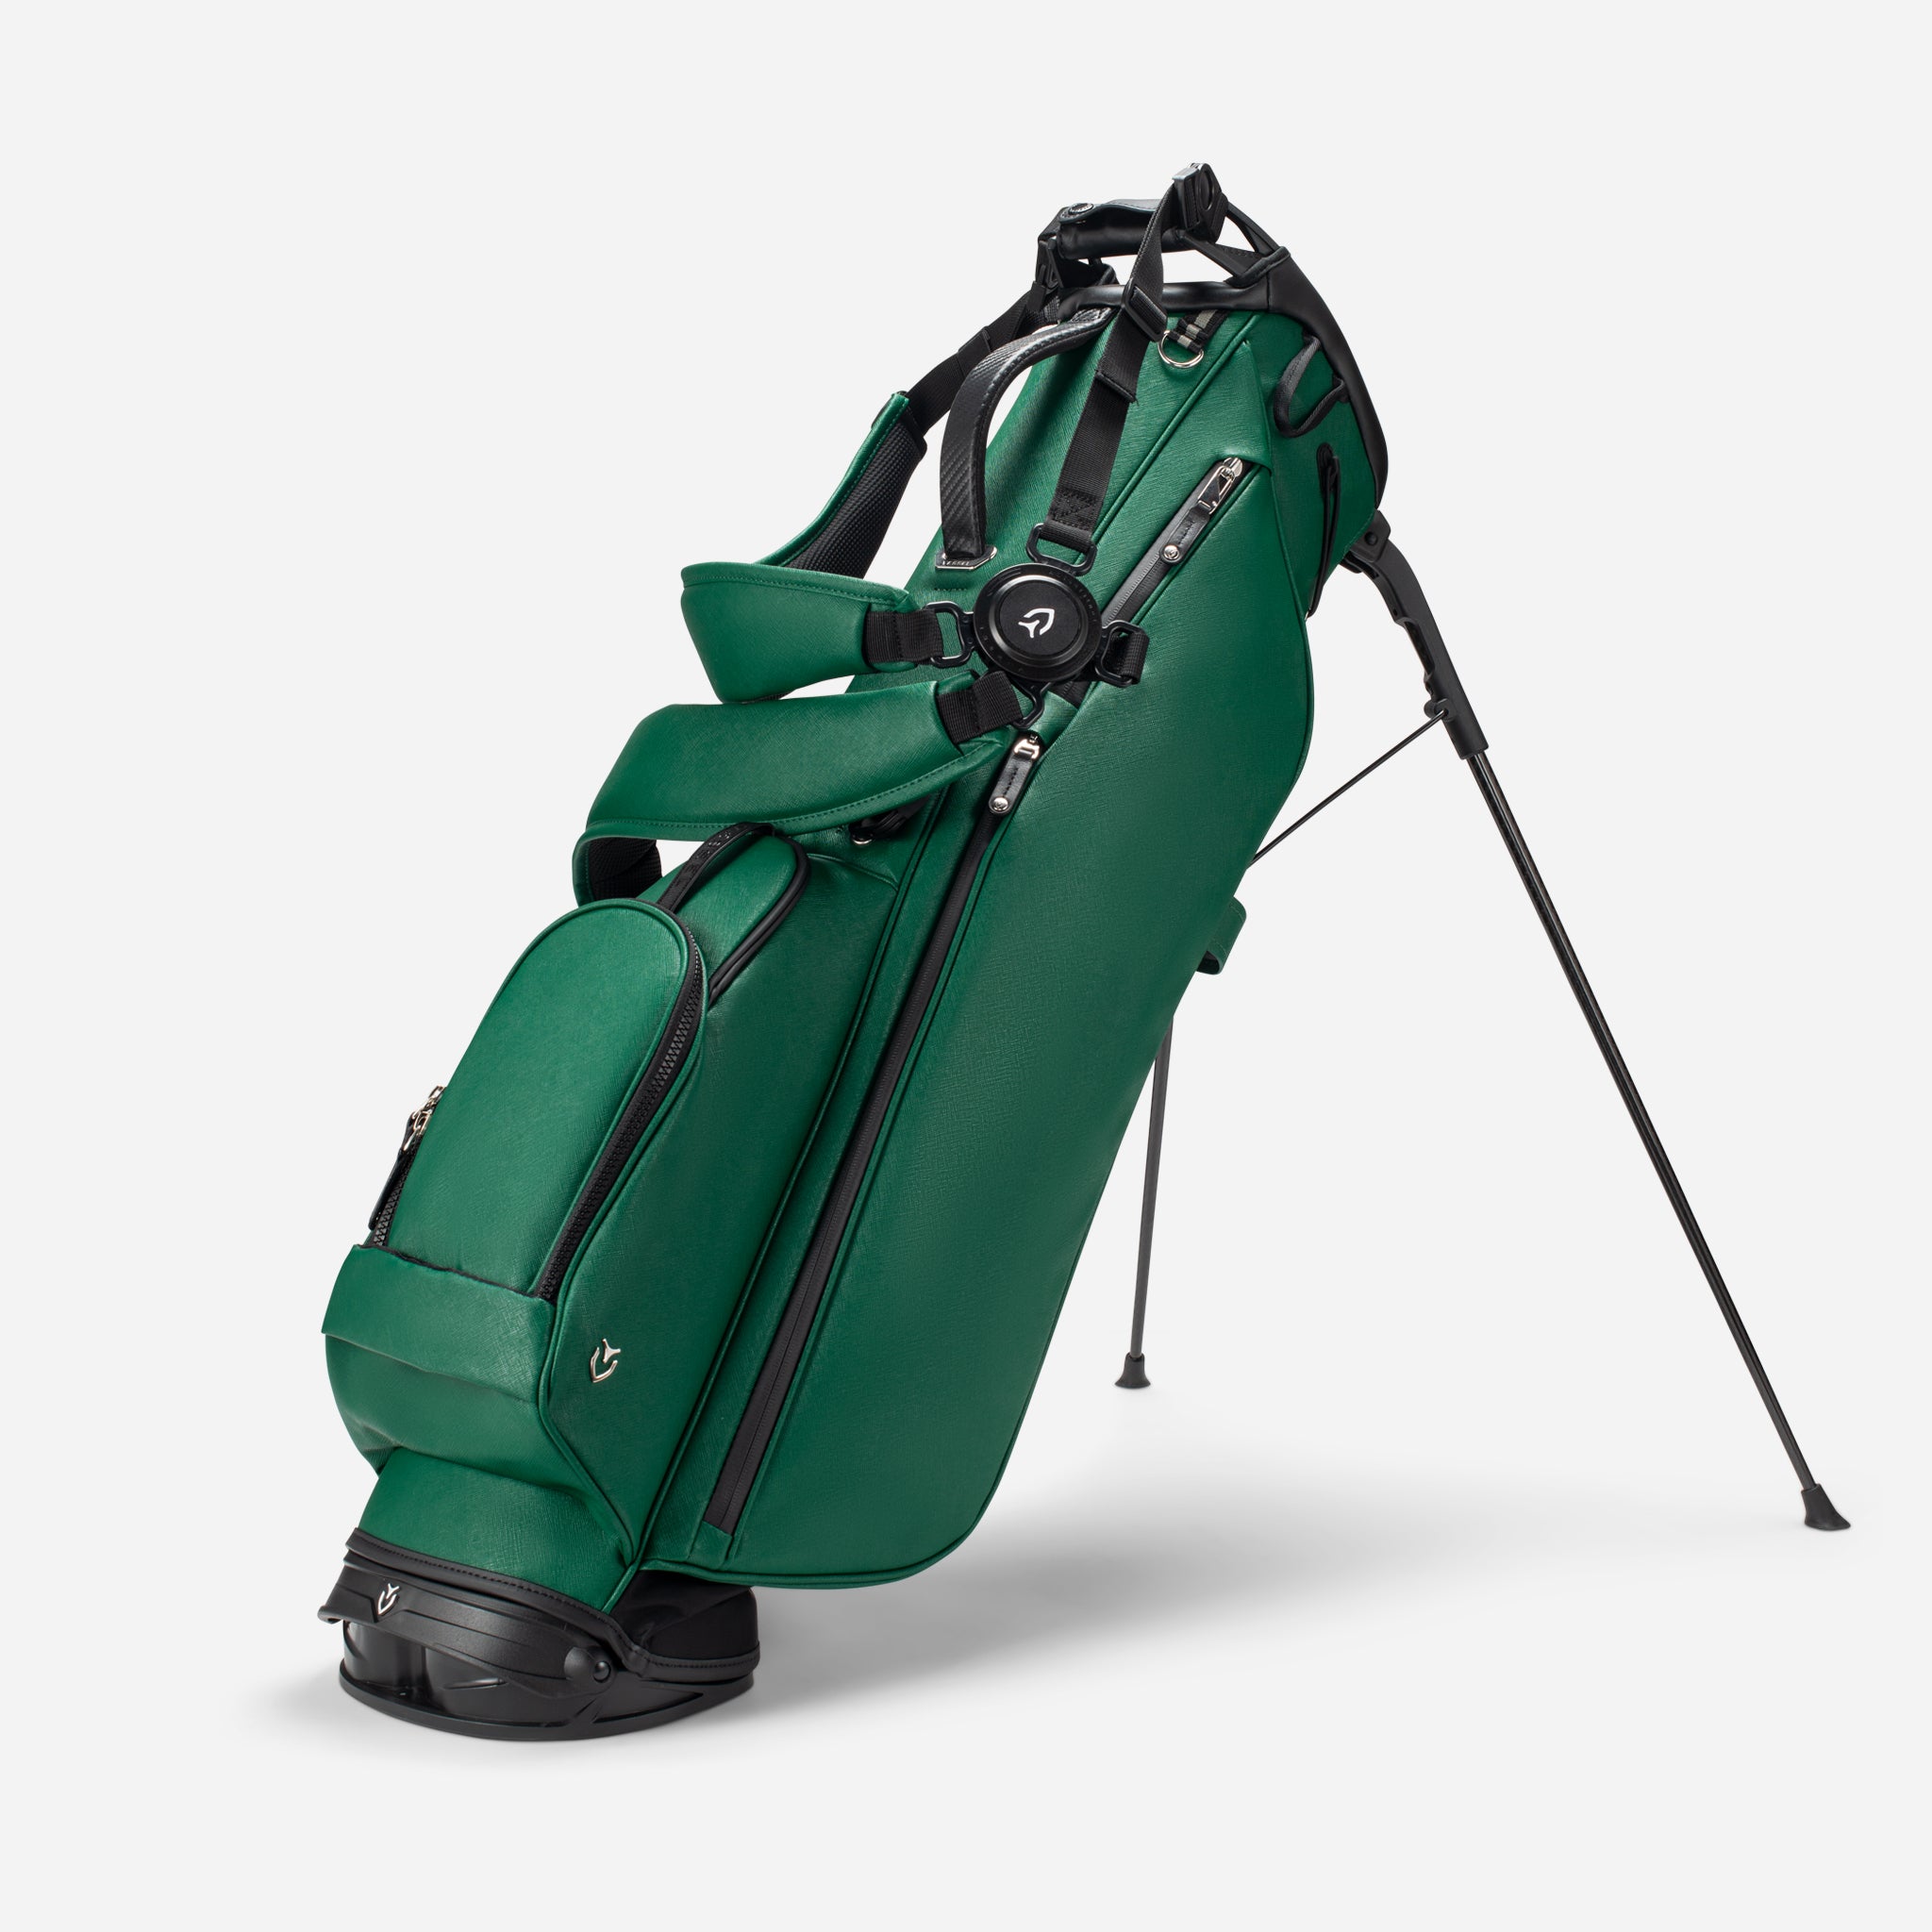 Choosing the Perfect Sunday Bag for Your Weekend Golf Adventures